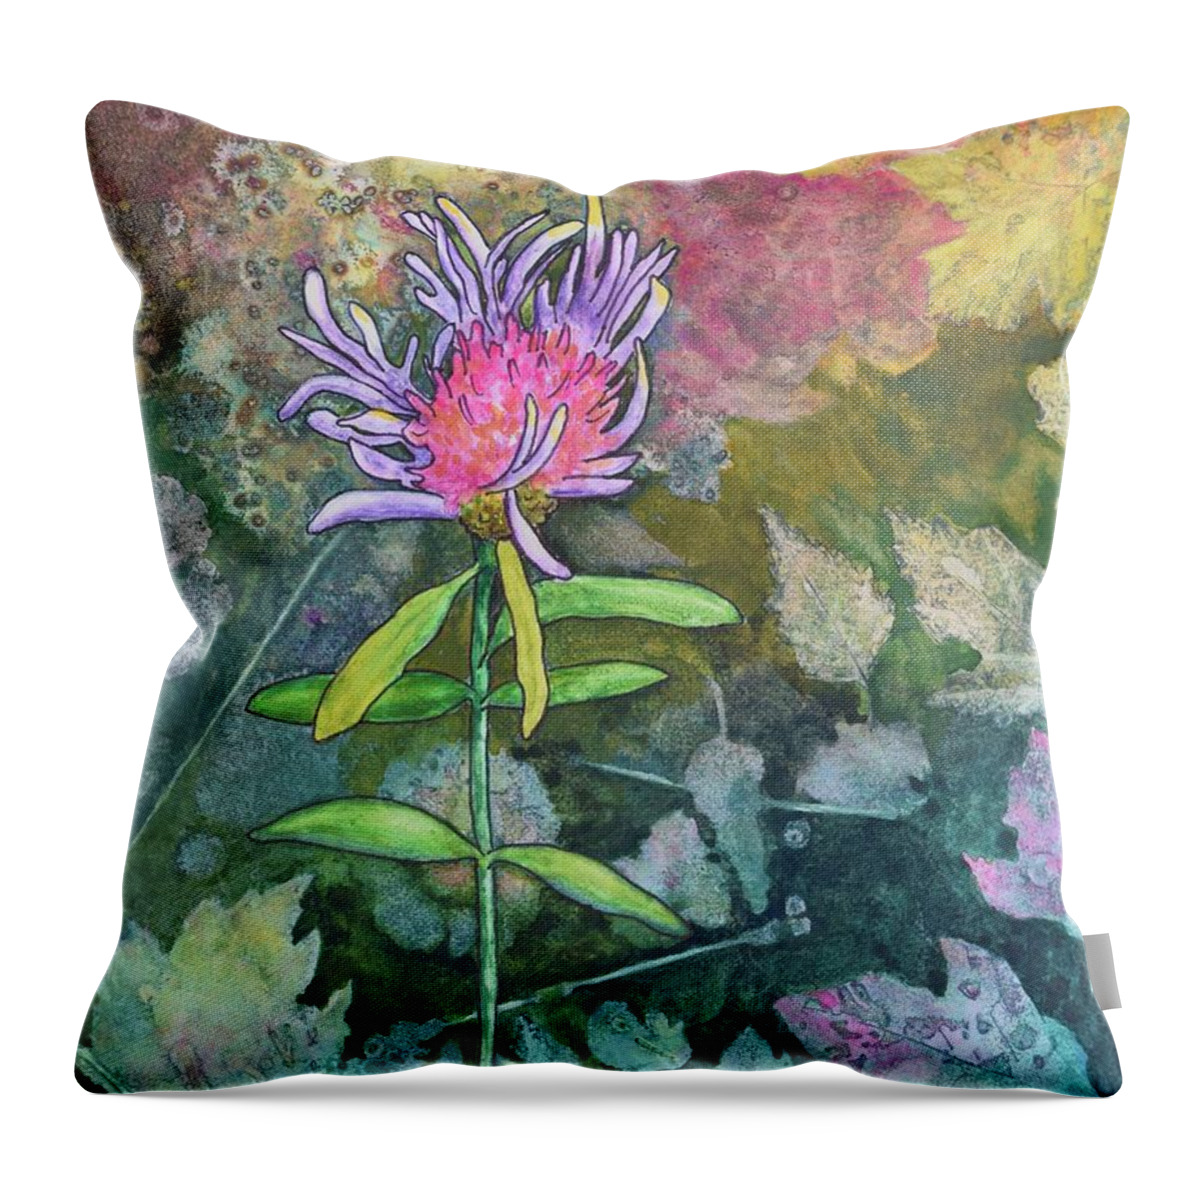 Thistle Throw Pillow featuring the painting Thistle by Nancy Jolley